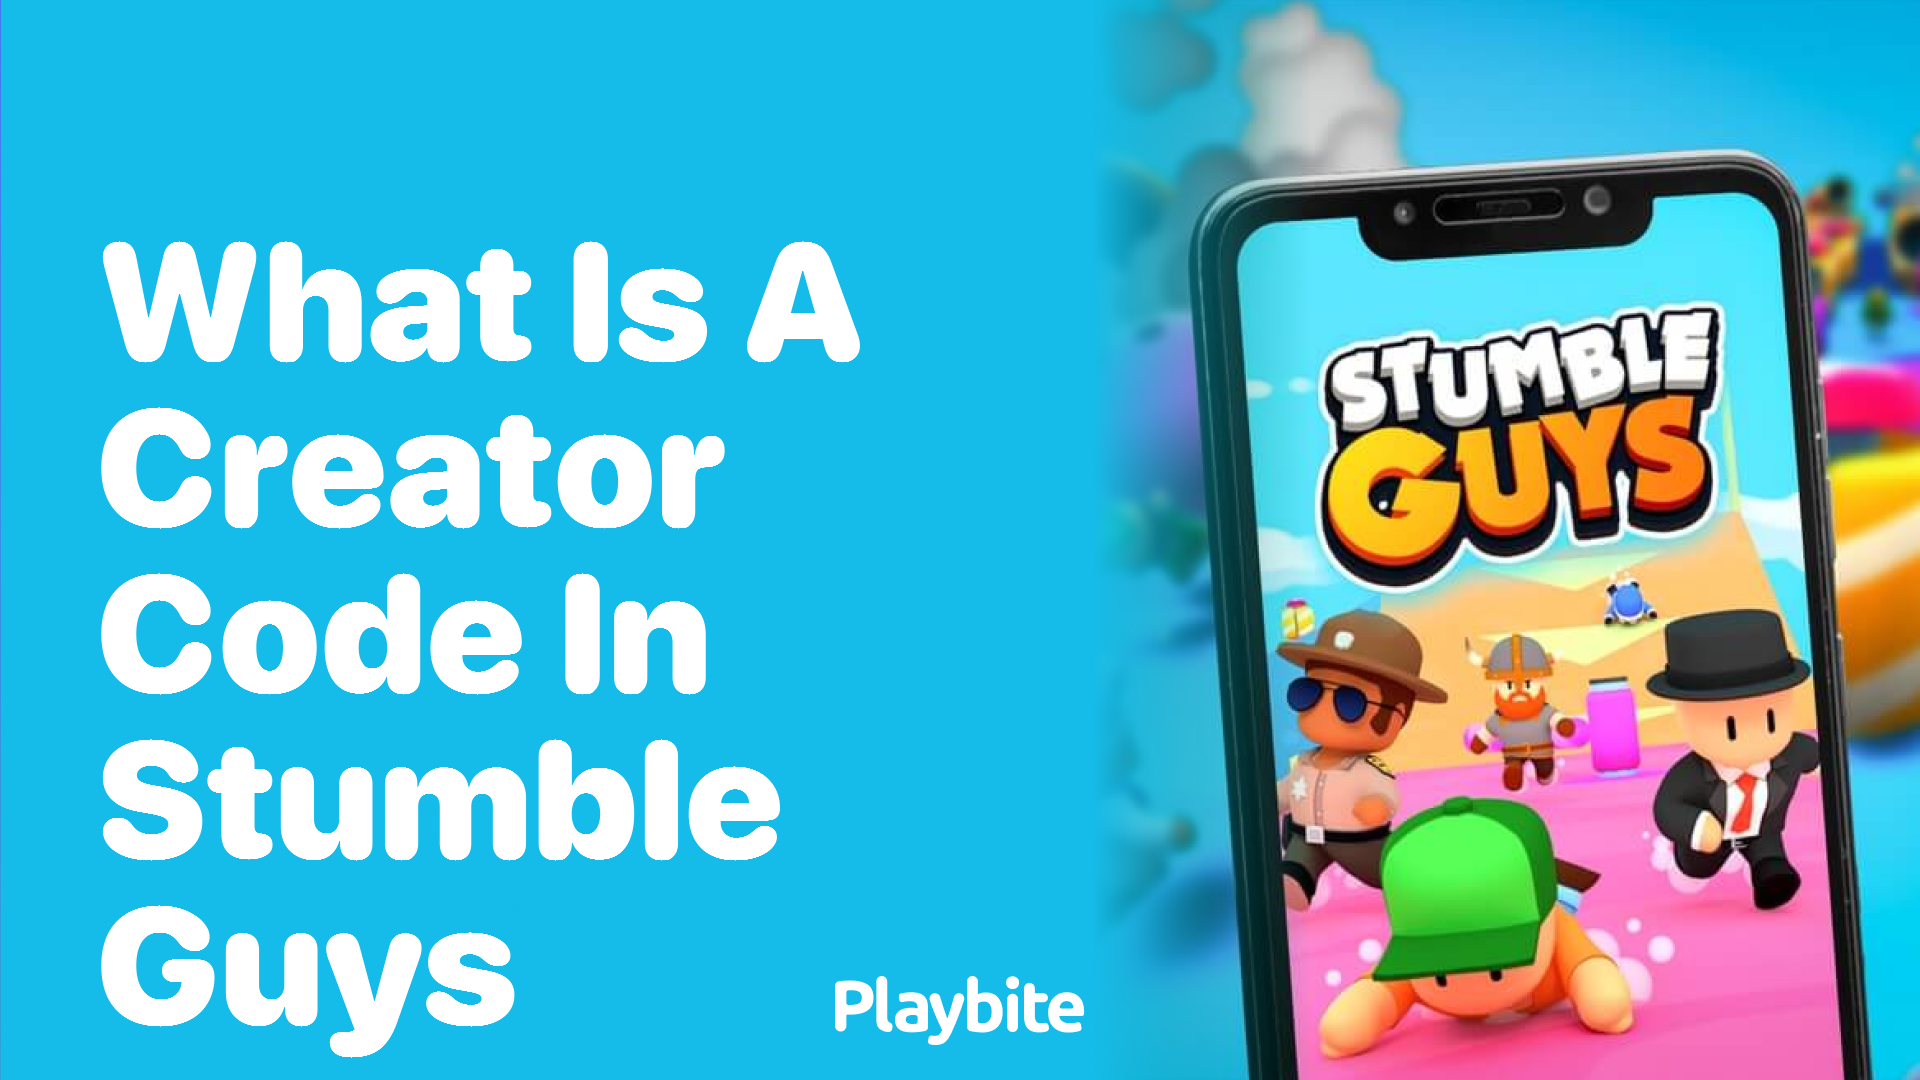 What is a Creator Code in Stumble Guys?